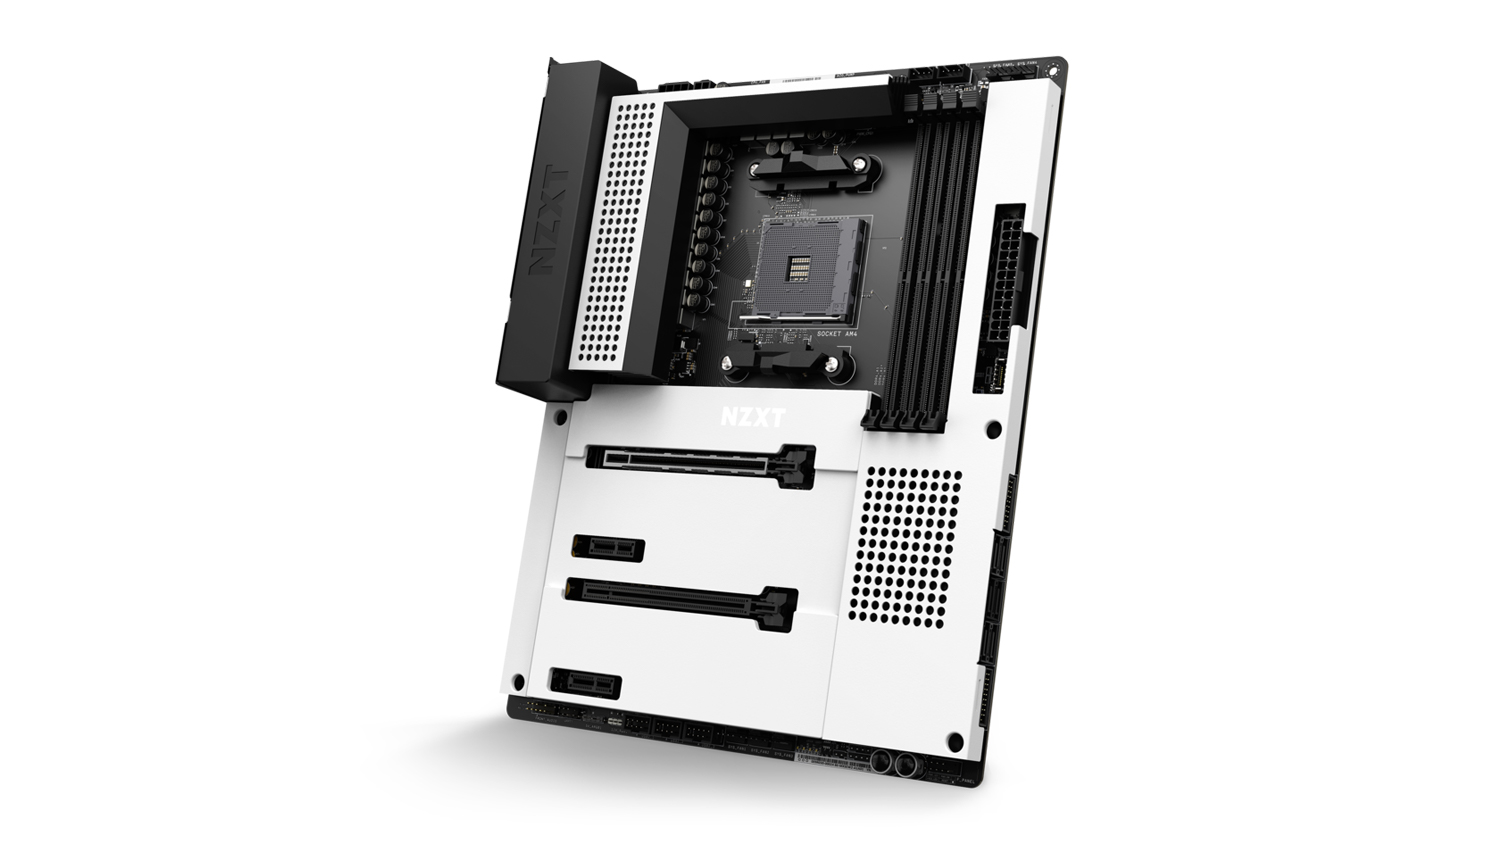 The NZXT N7 B550 is a great choice if you’re upgrading your AMD Ryzen processor.